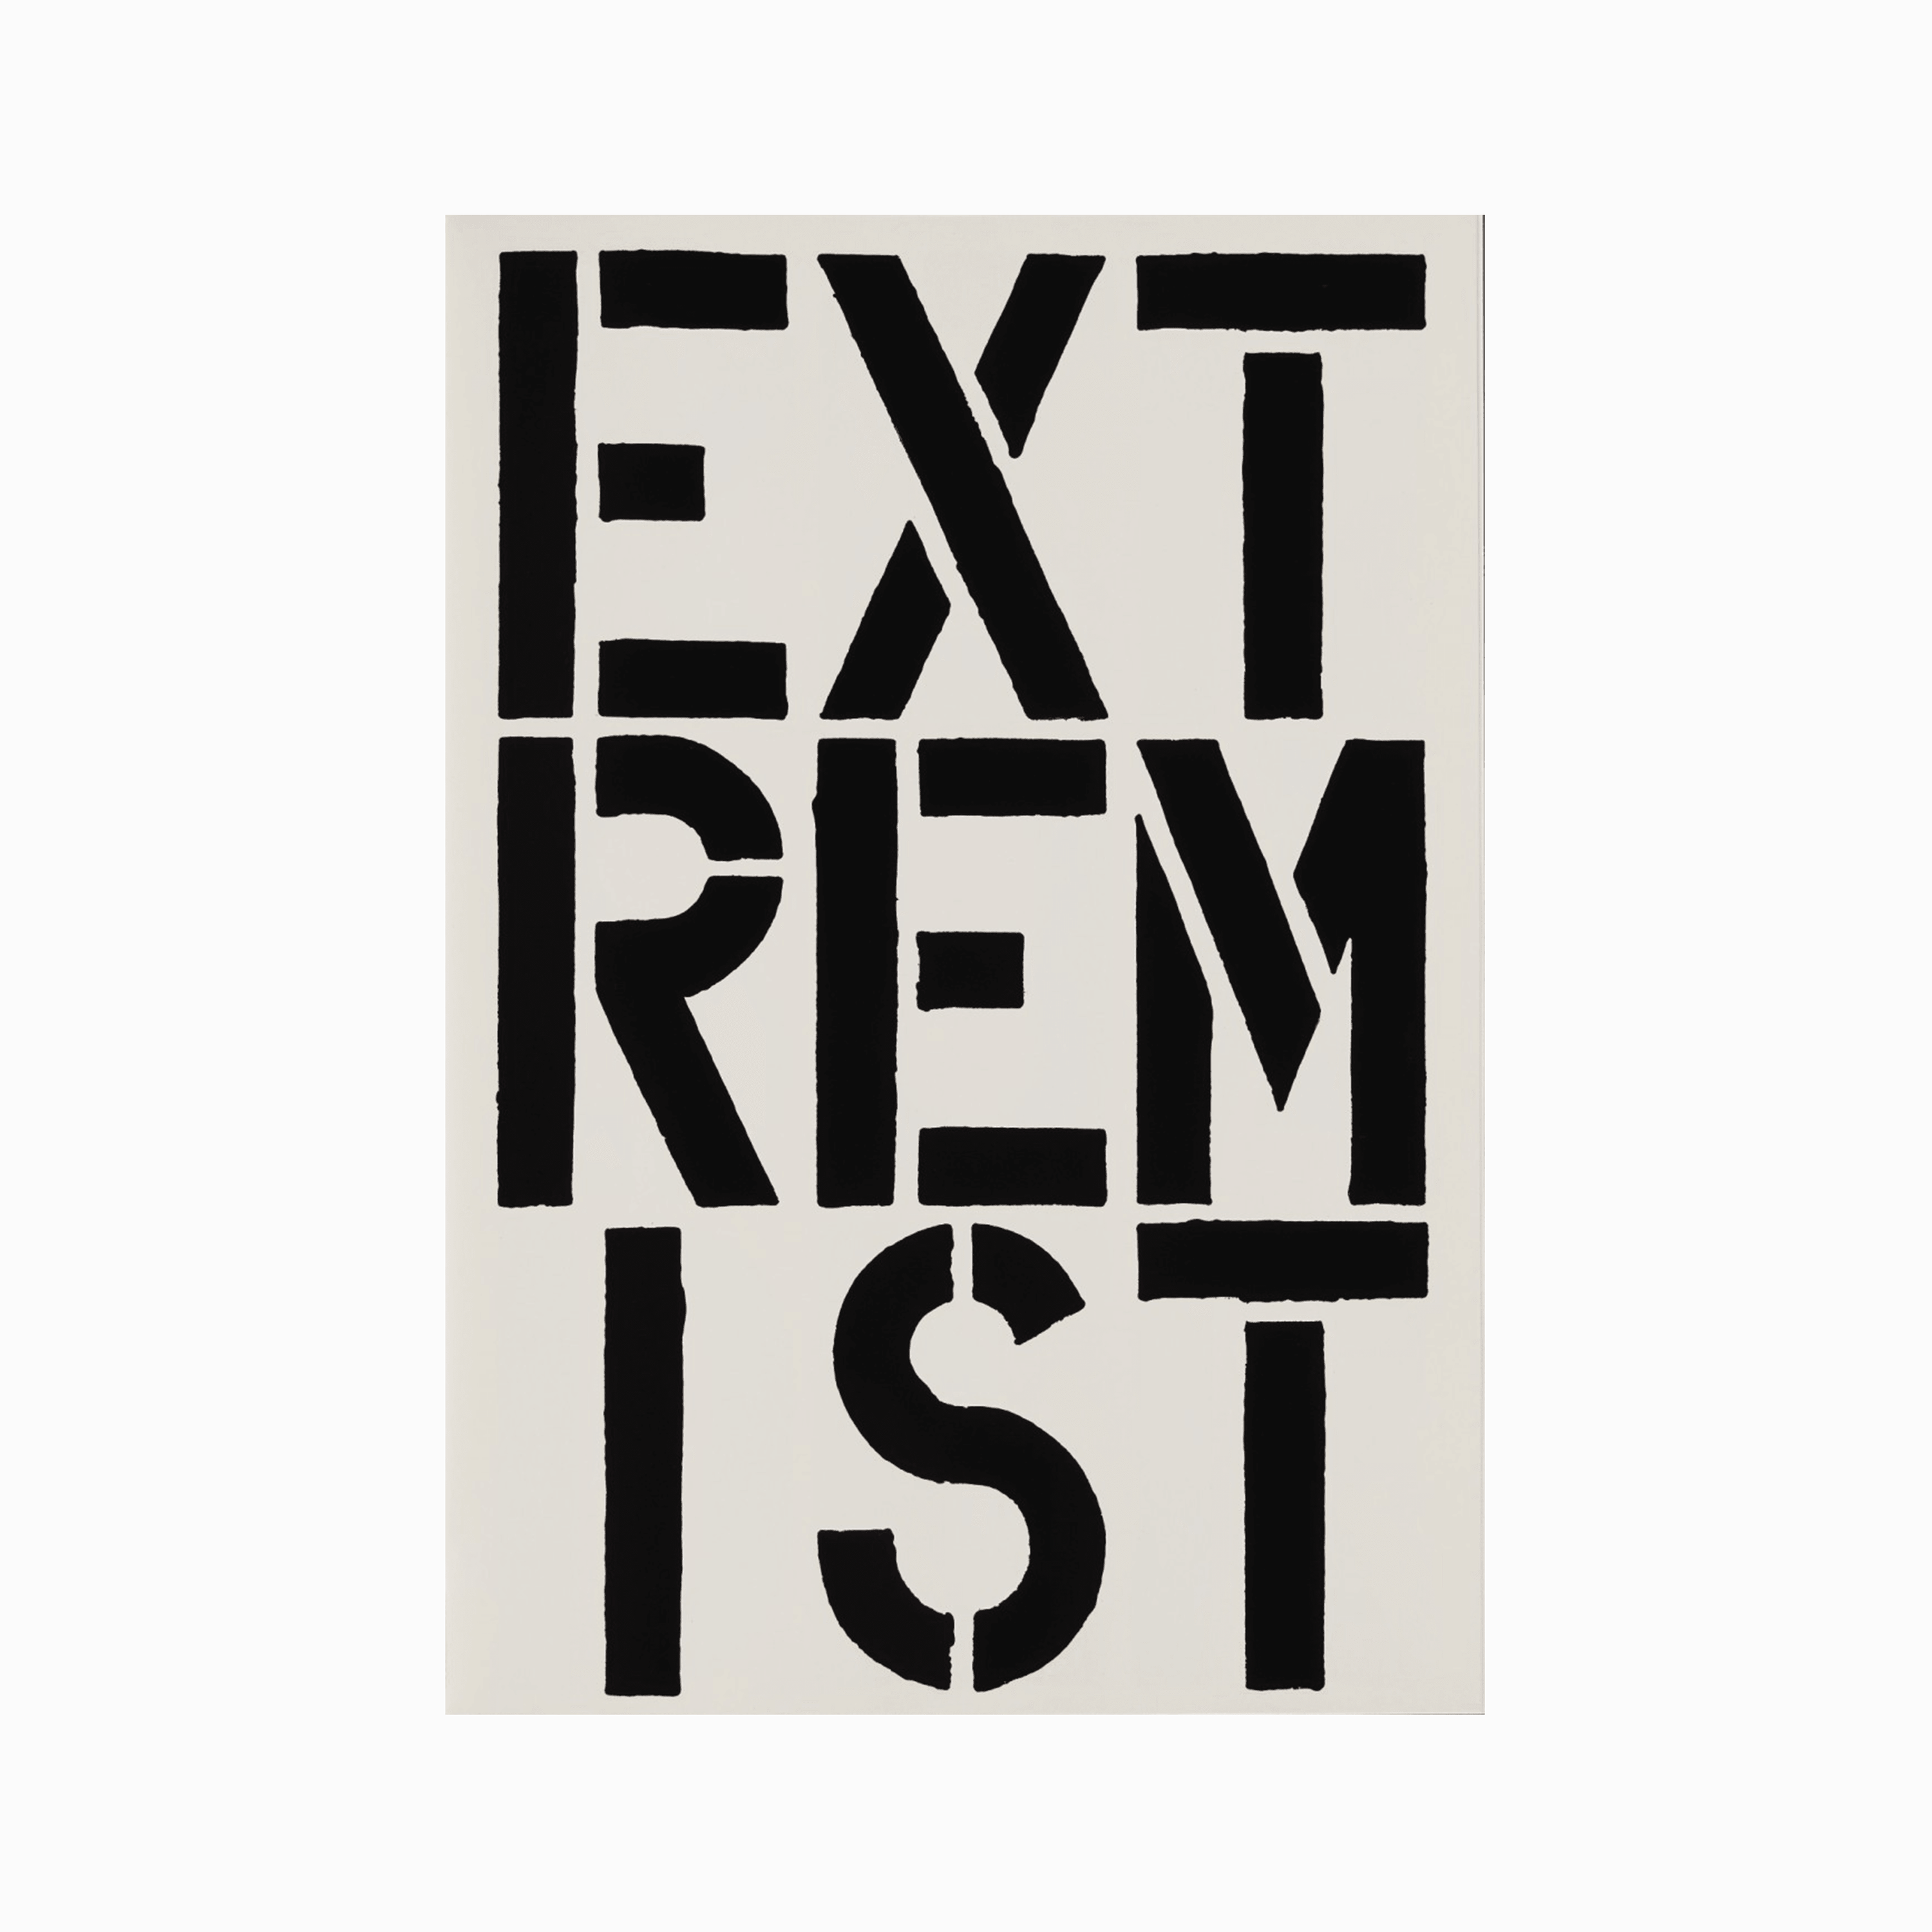 Extremist (page from Black Book) - CommodityGallery